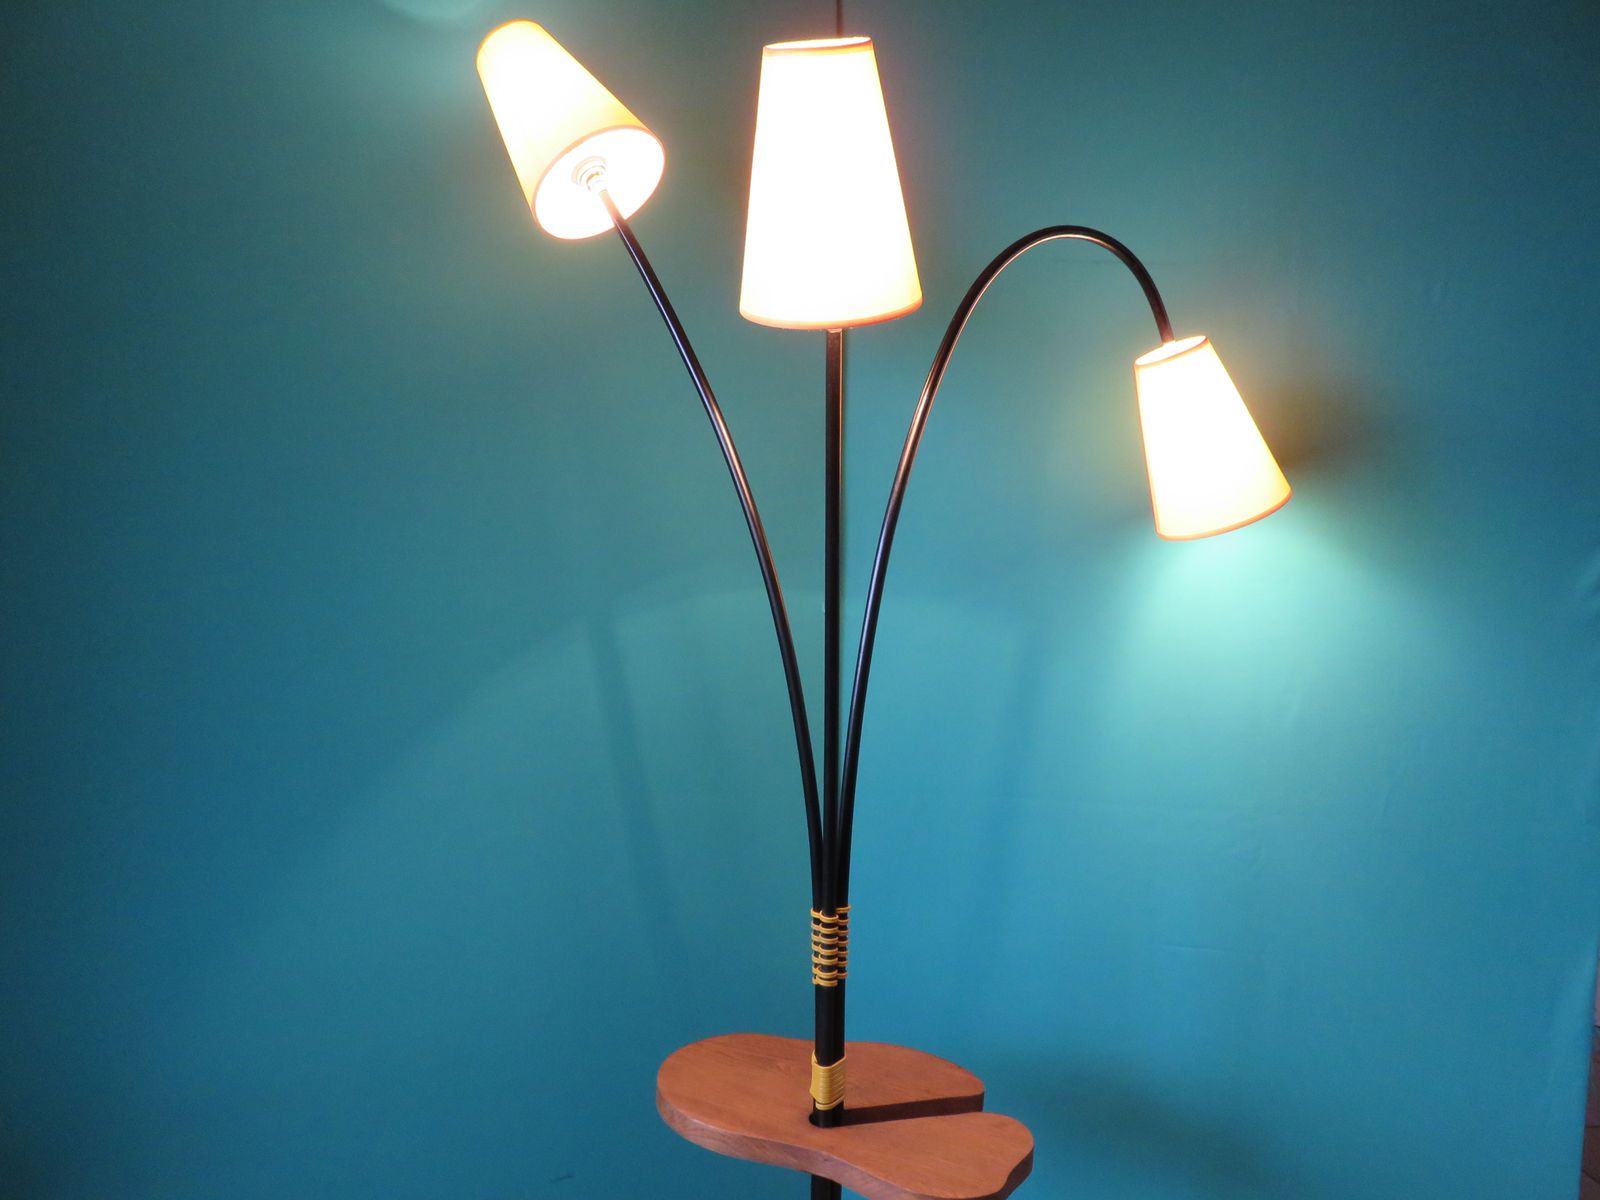 Vintage Yellow Floor Lamp, 1950s for sale at Pamono